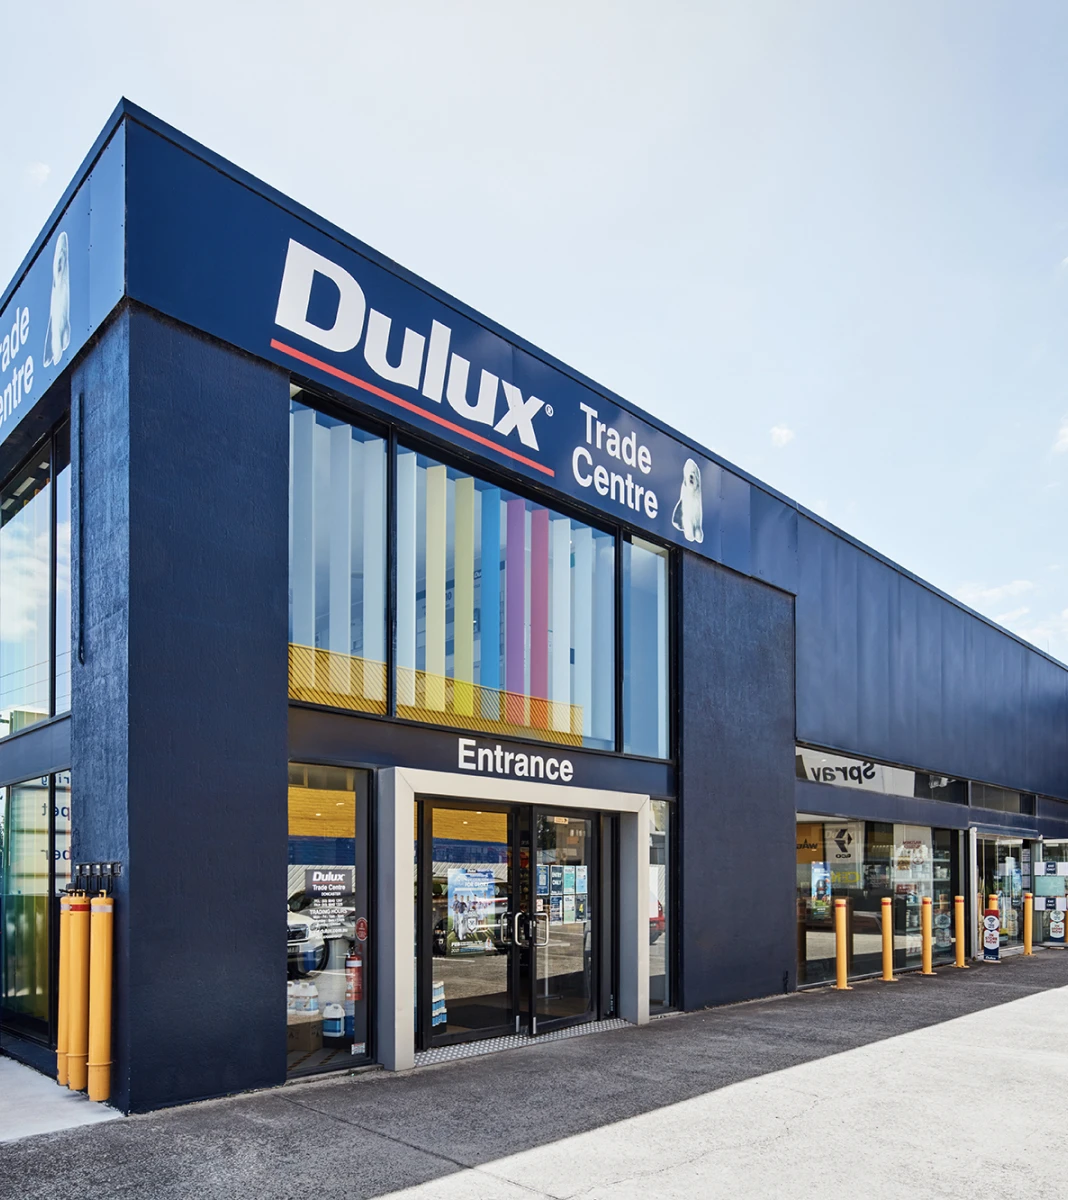 Dulux Trade Centre store front